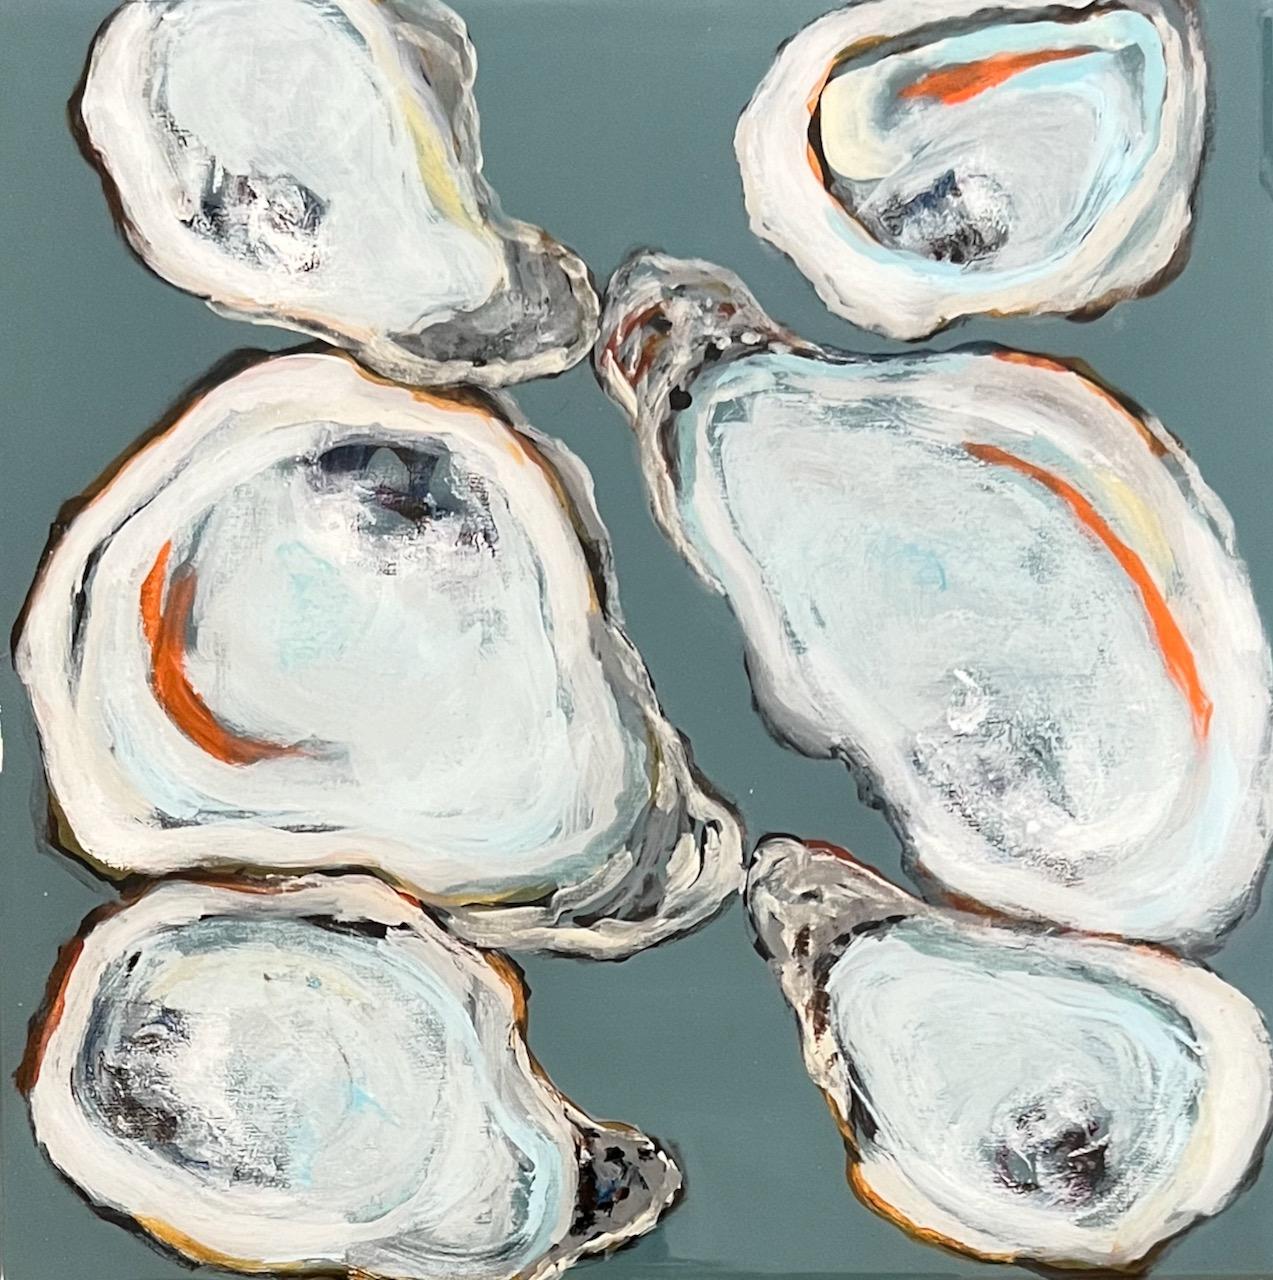 Anne Harney Still-Life Painting - "Under the Bridge Oysters" mixed media painting of six oysters, grey background